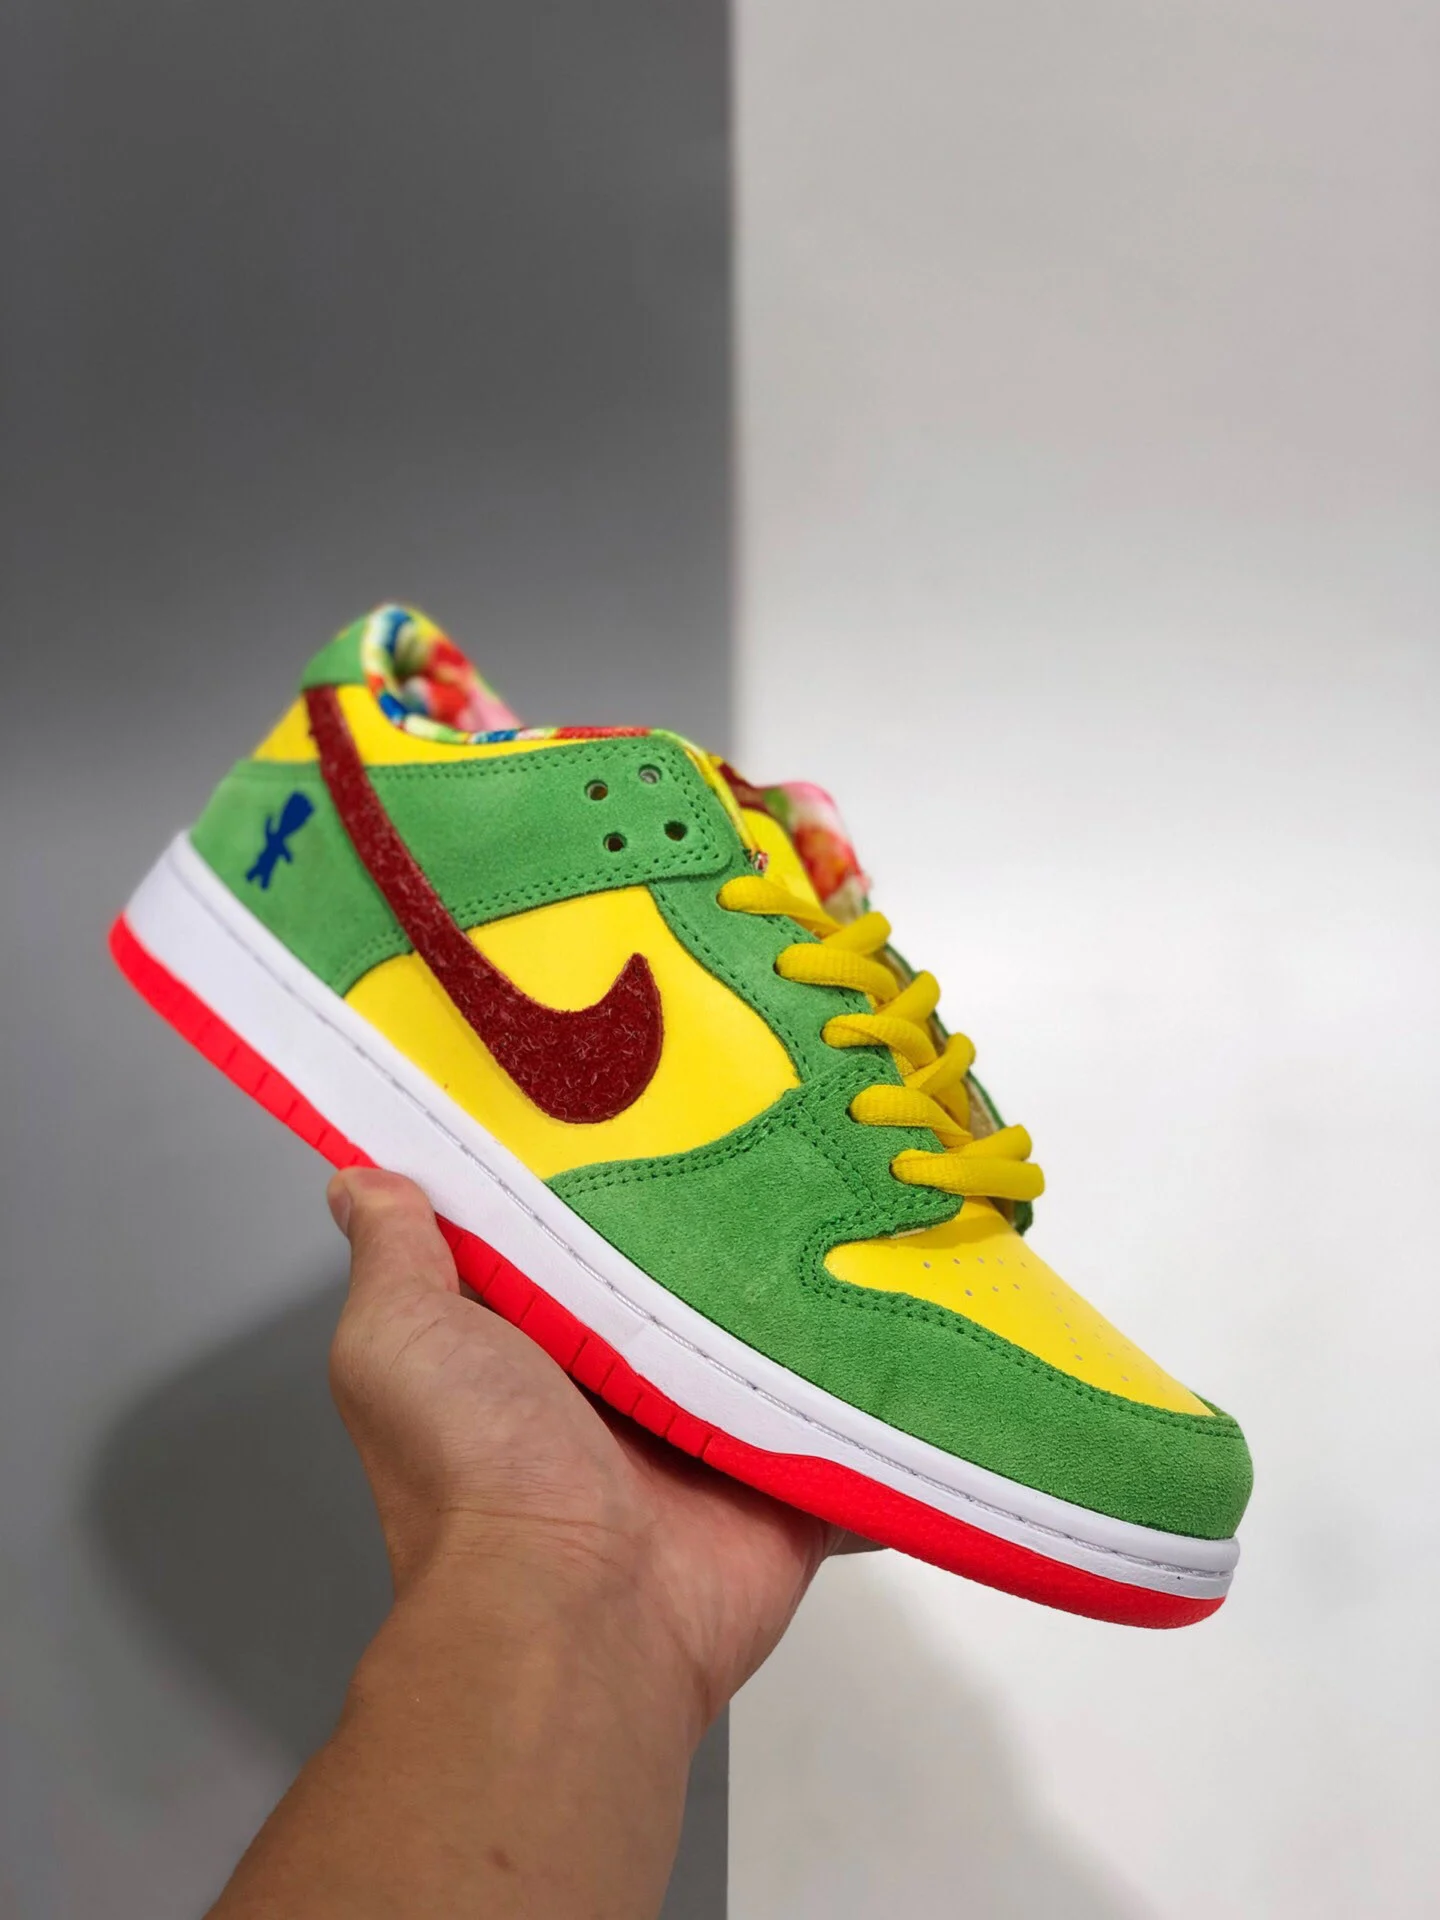 Sour Patch Kids x Nike SB Dunk Low Orange Green Red For Sale